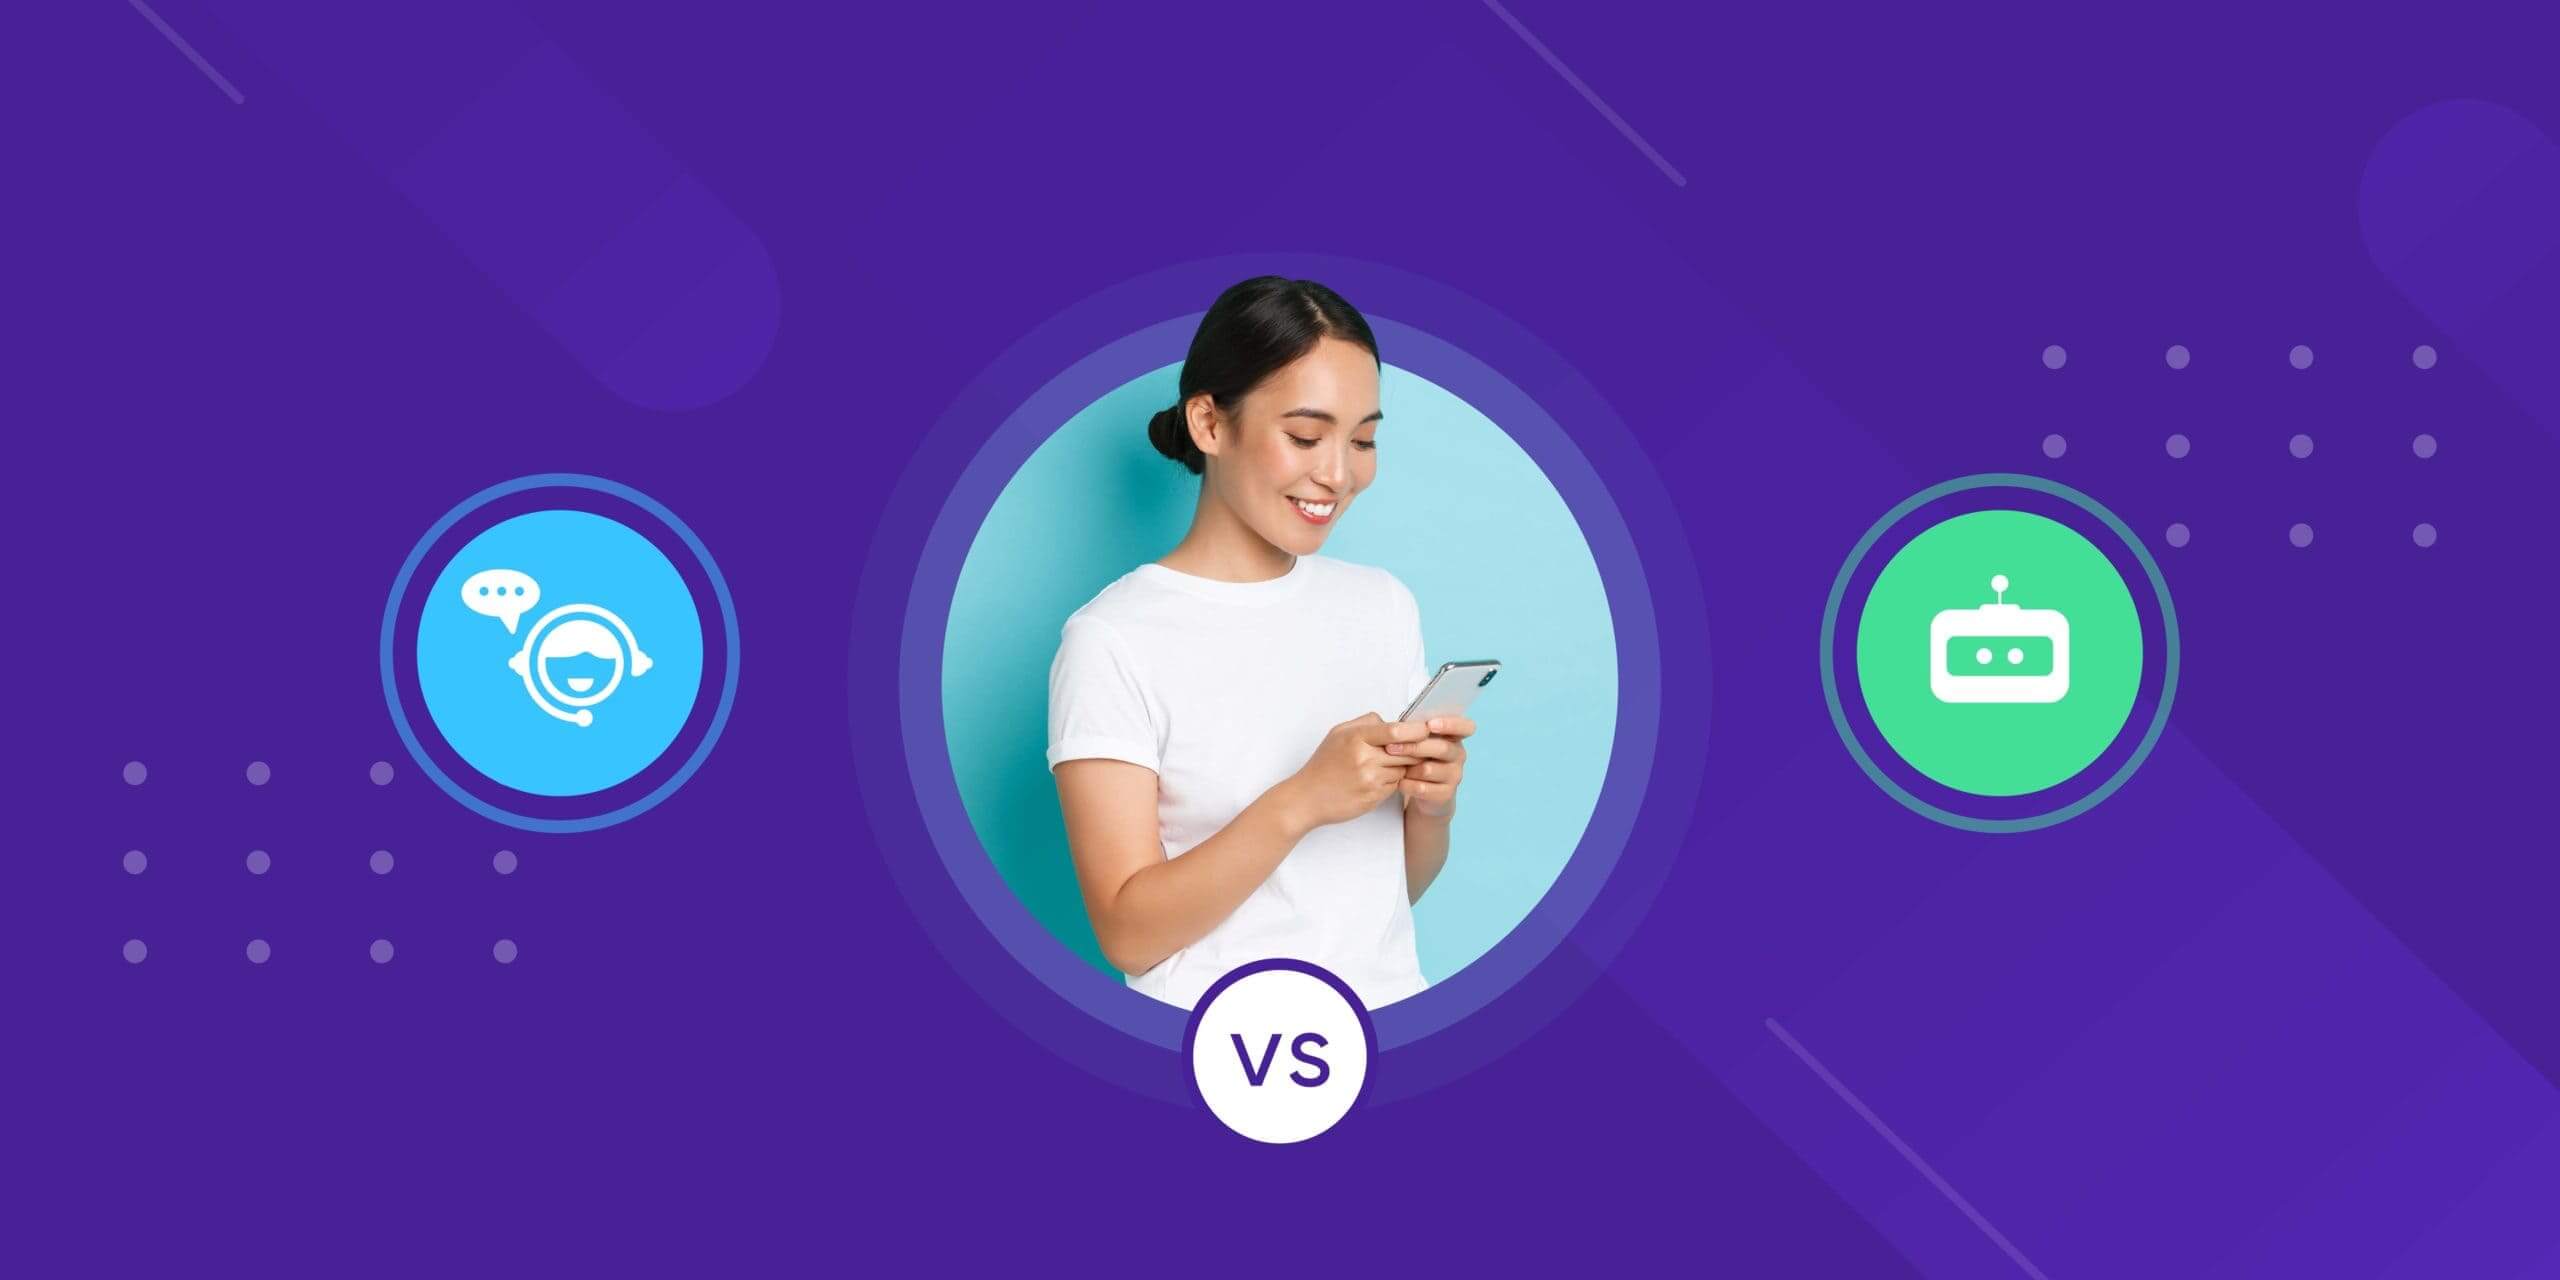 key differences between conversational AI and Live chat